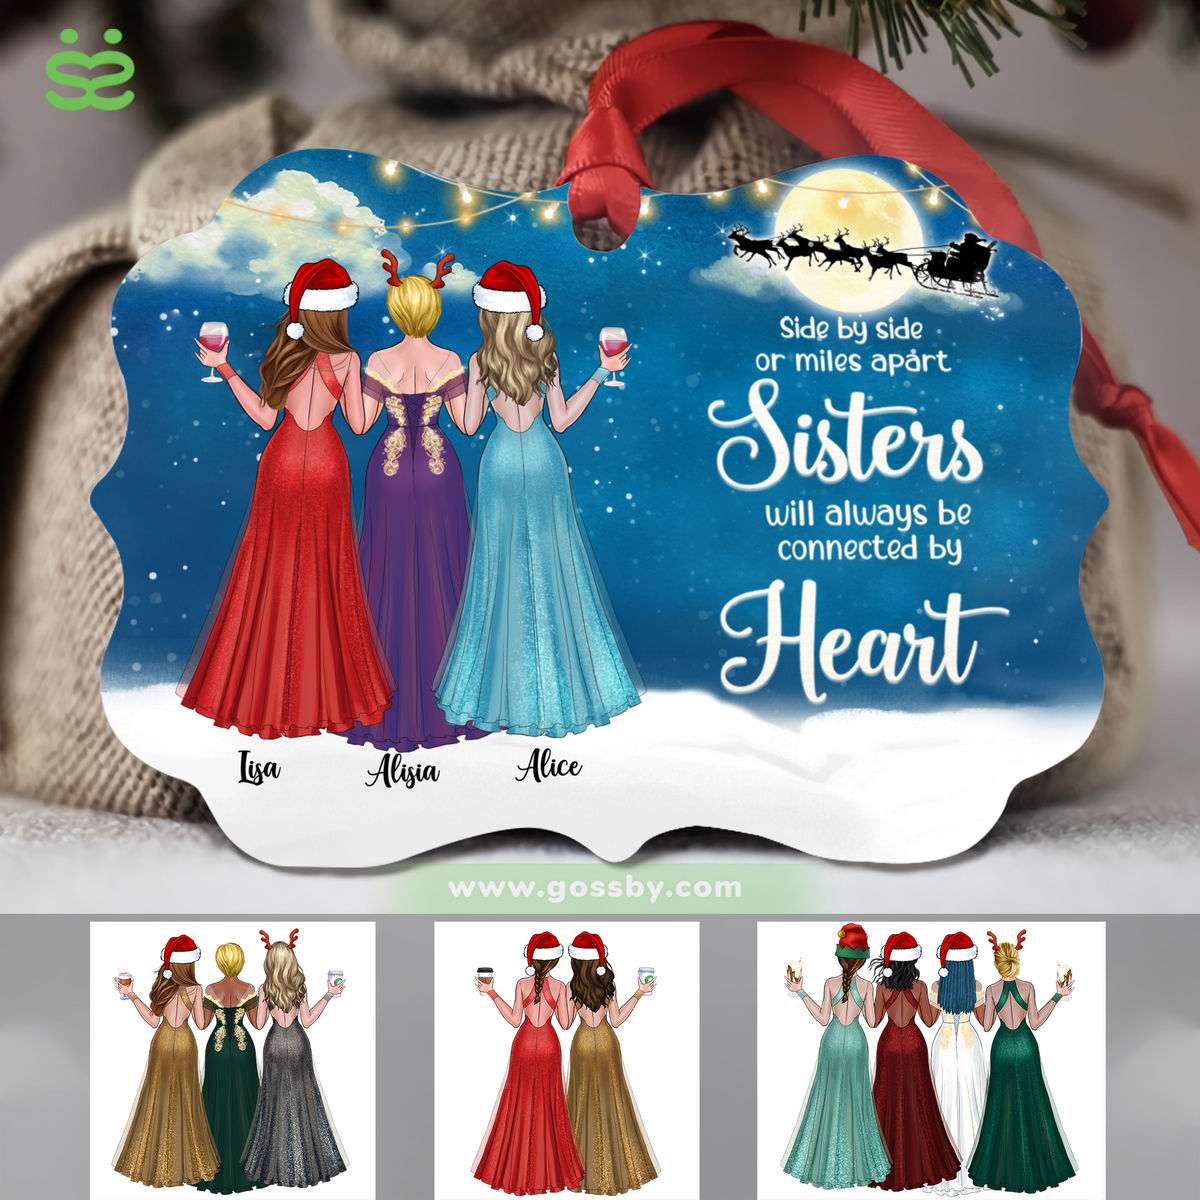 Personalized Ornament - Sisters - Side by side or miles apart, Sisters will always be connected by heart (5442)